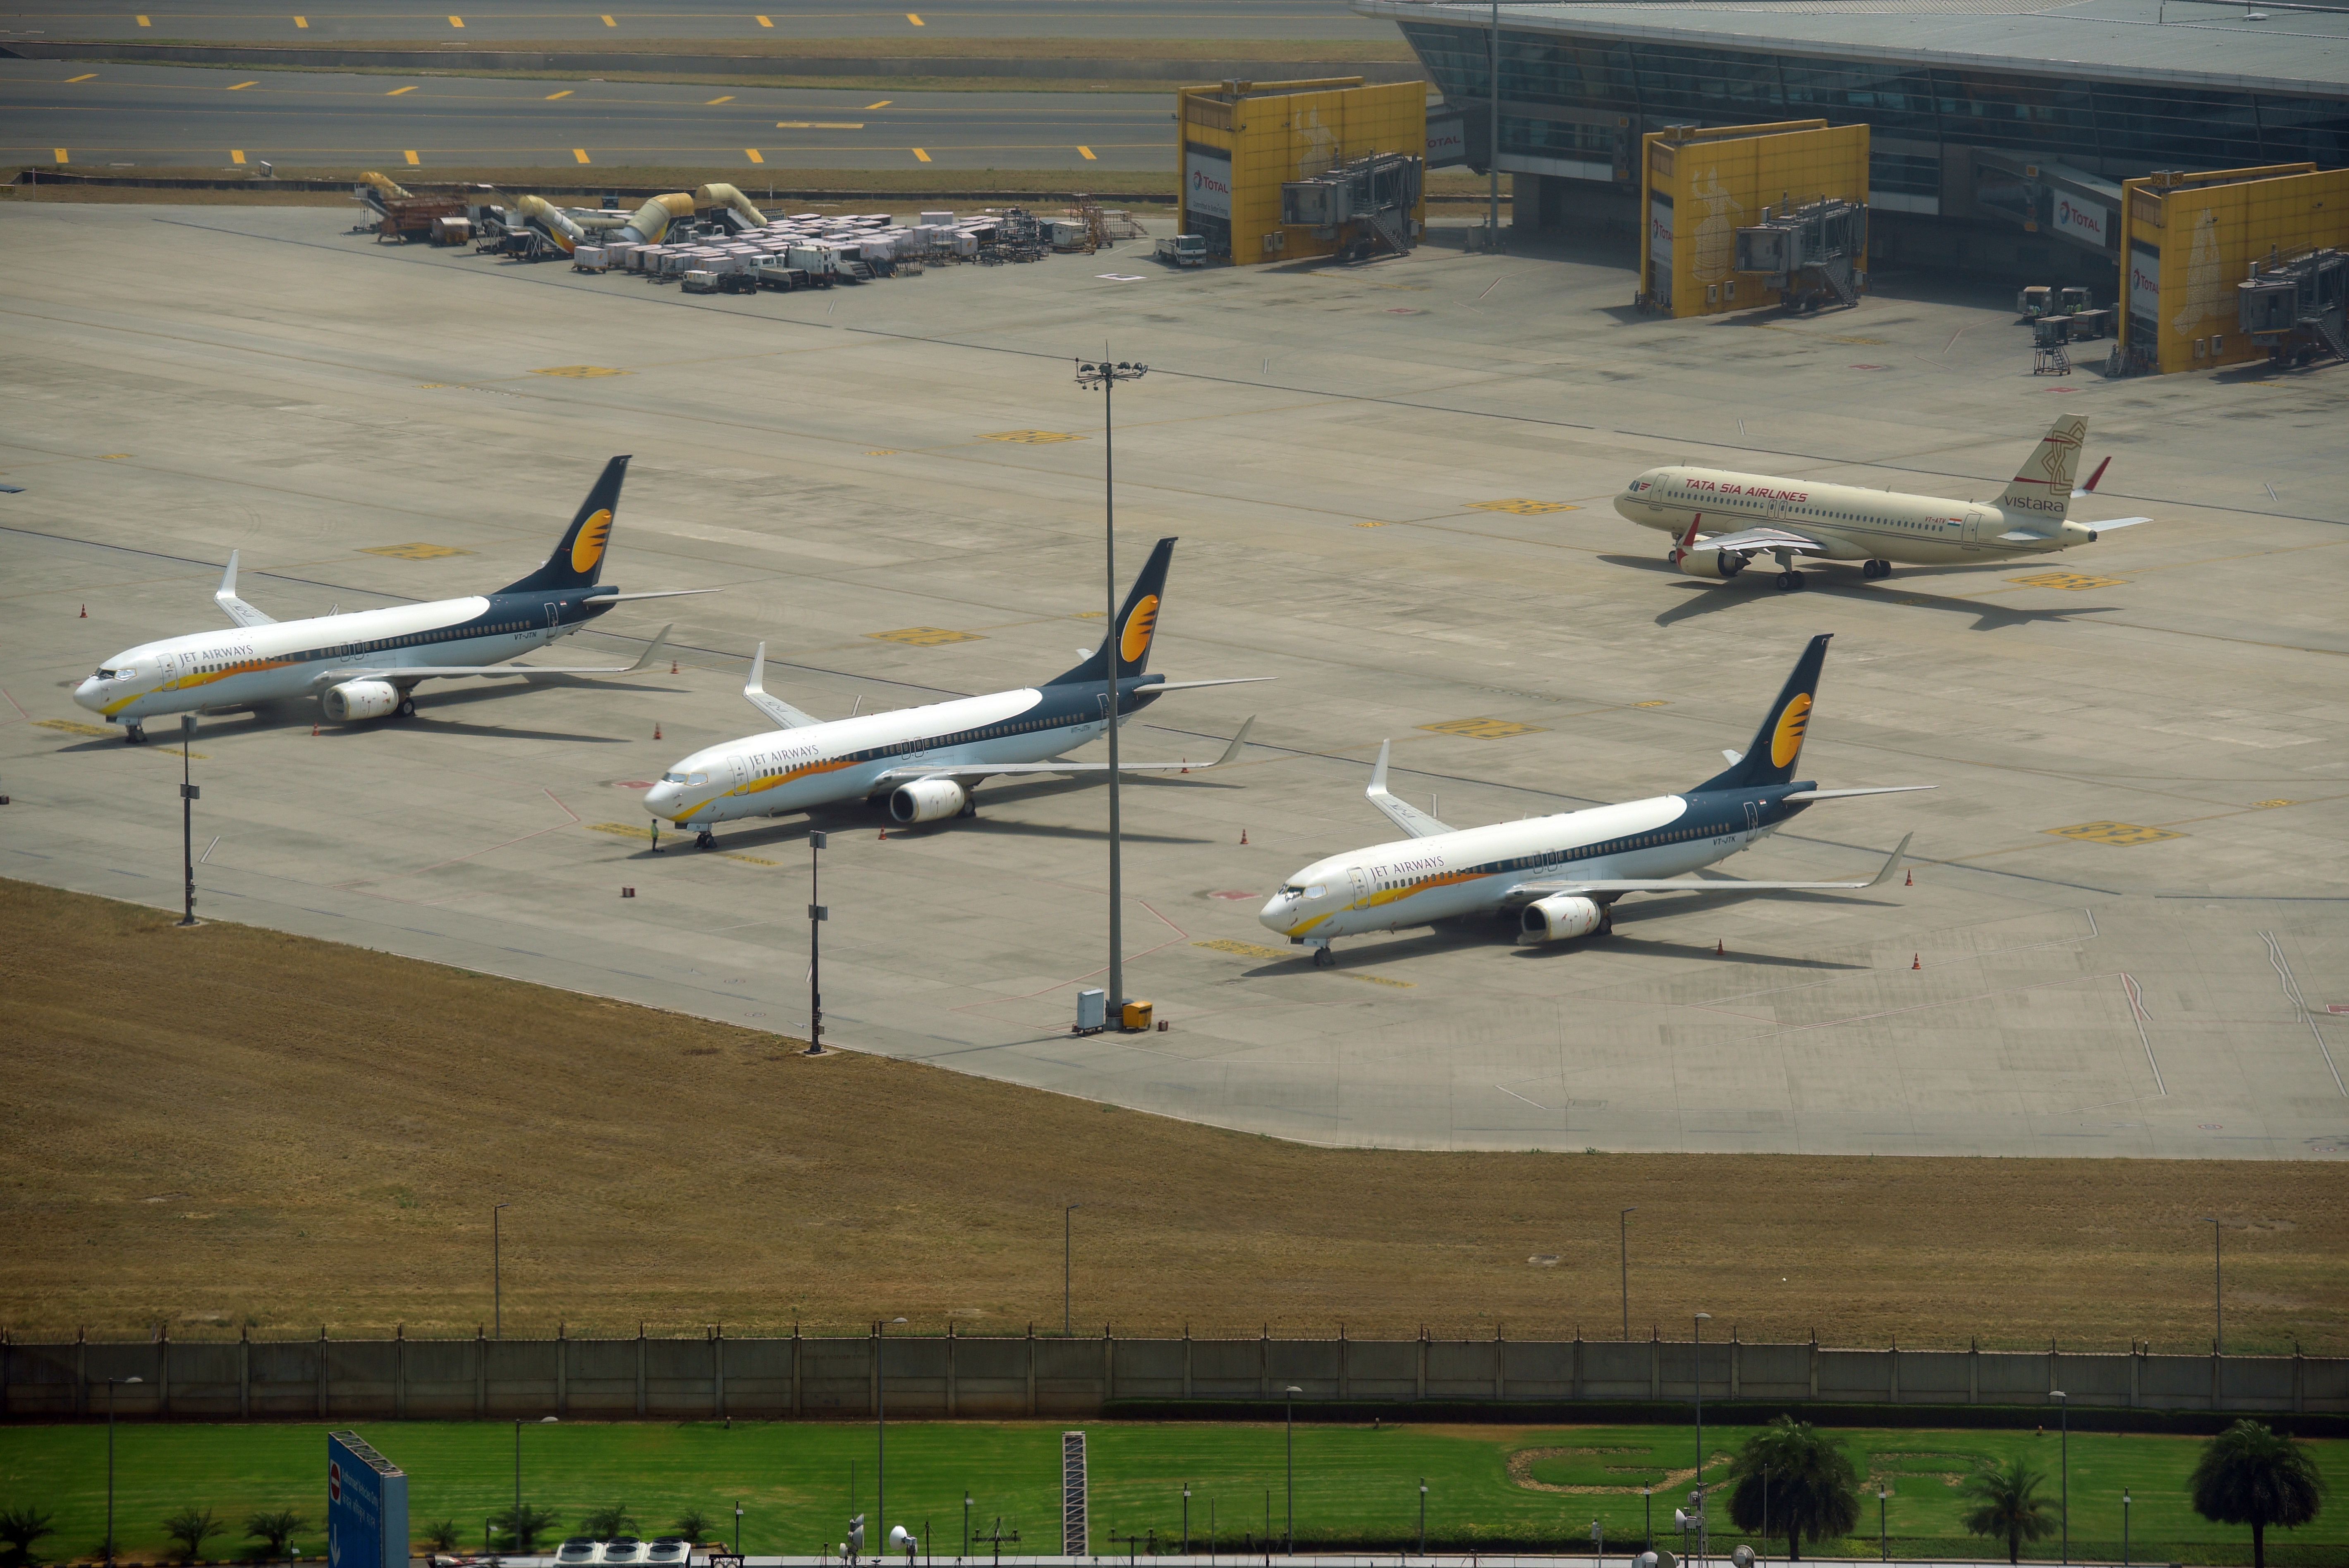 A view of the parked Jet Airways planes inside the parking bay at Delhi airport.